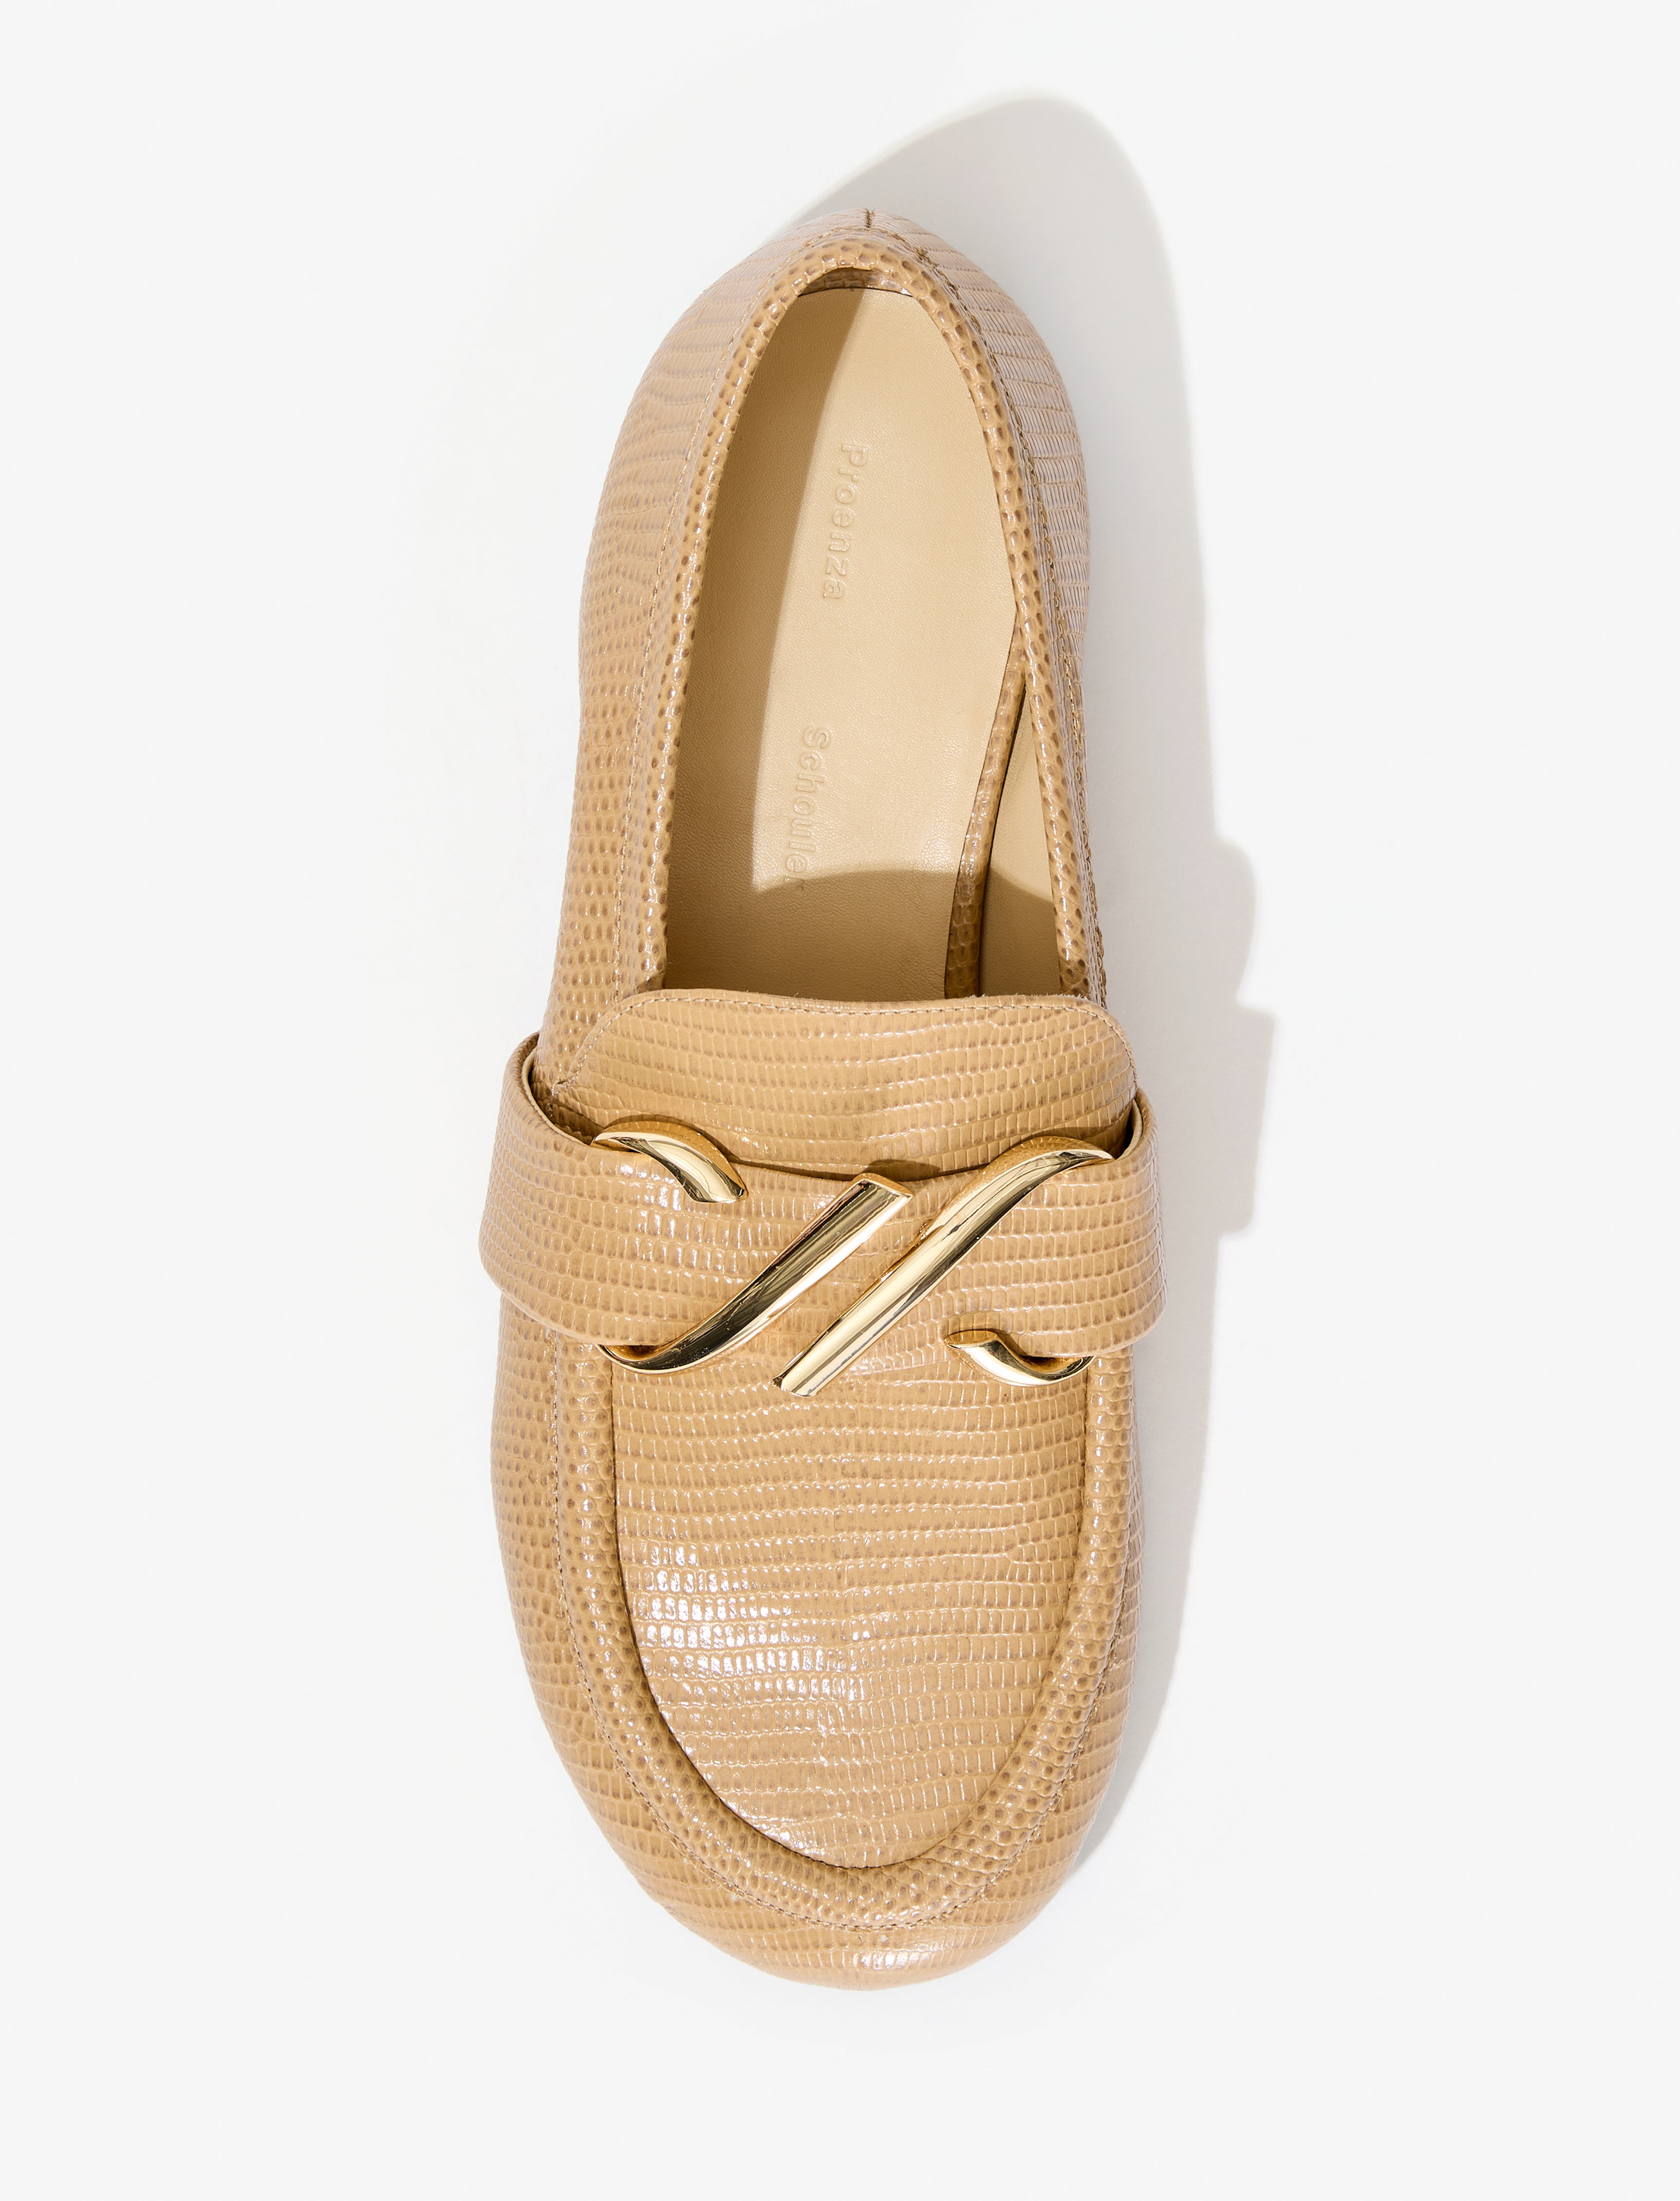 Monogram Loafers in Embossed Leather Paper